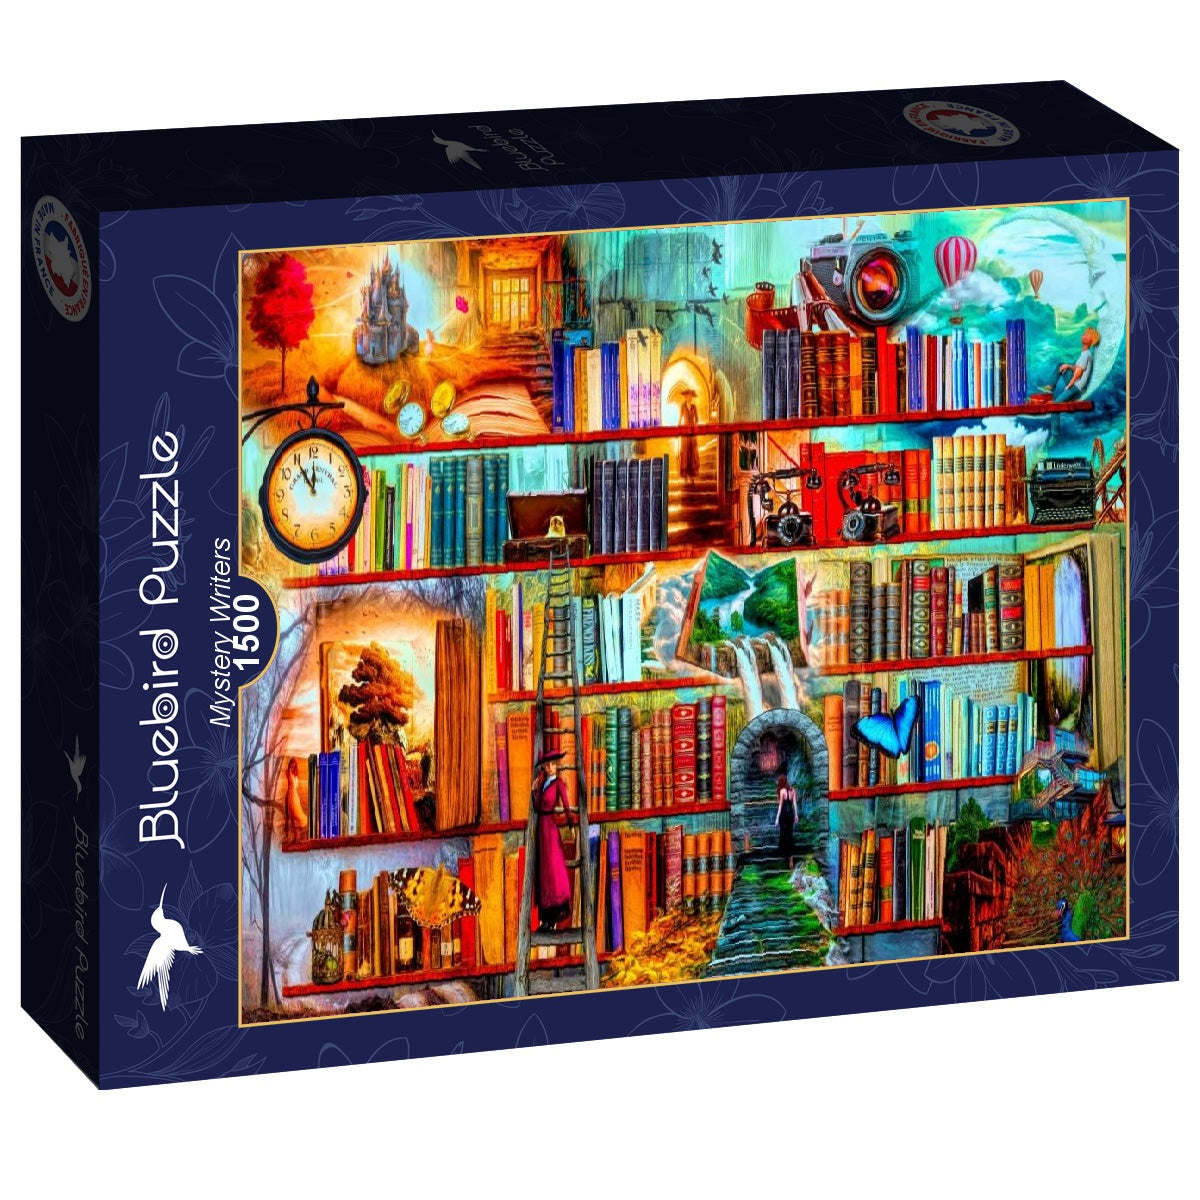 Mystery Writers by Celebrate Life Gallery, 1500 Piece Puzzle